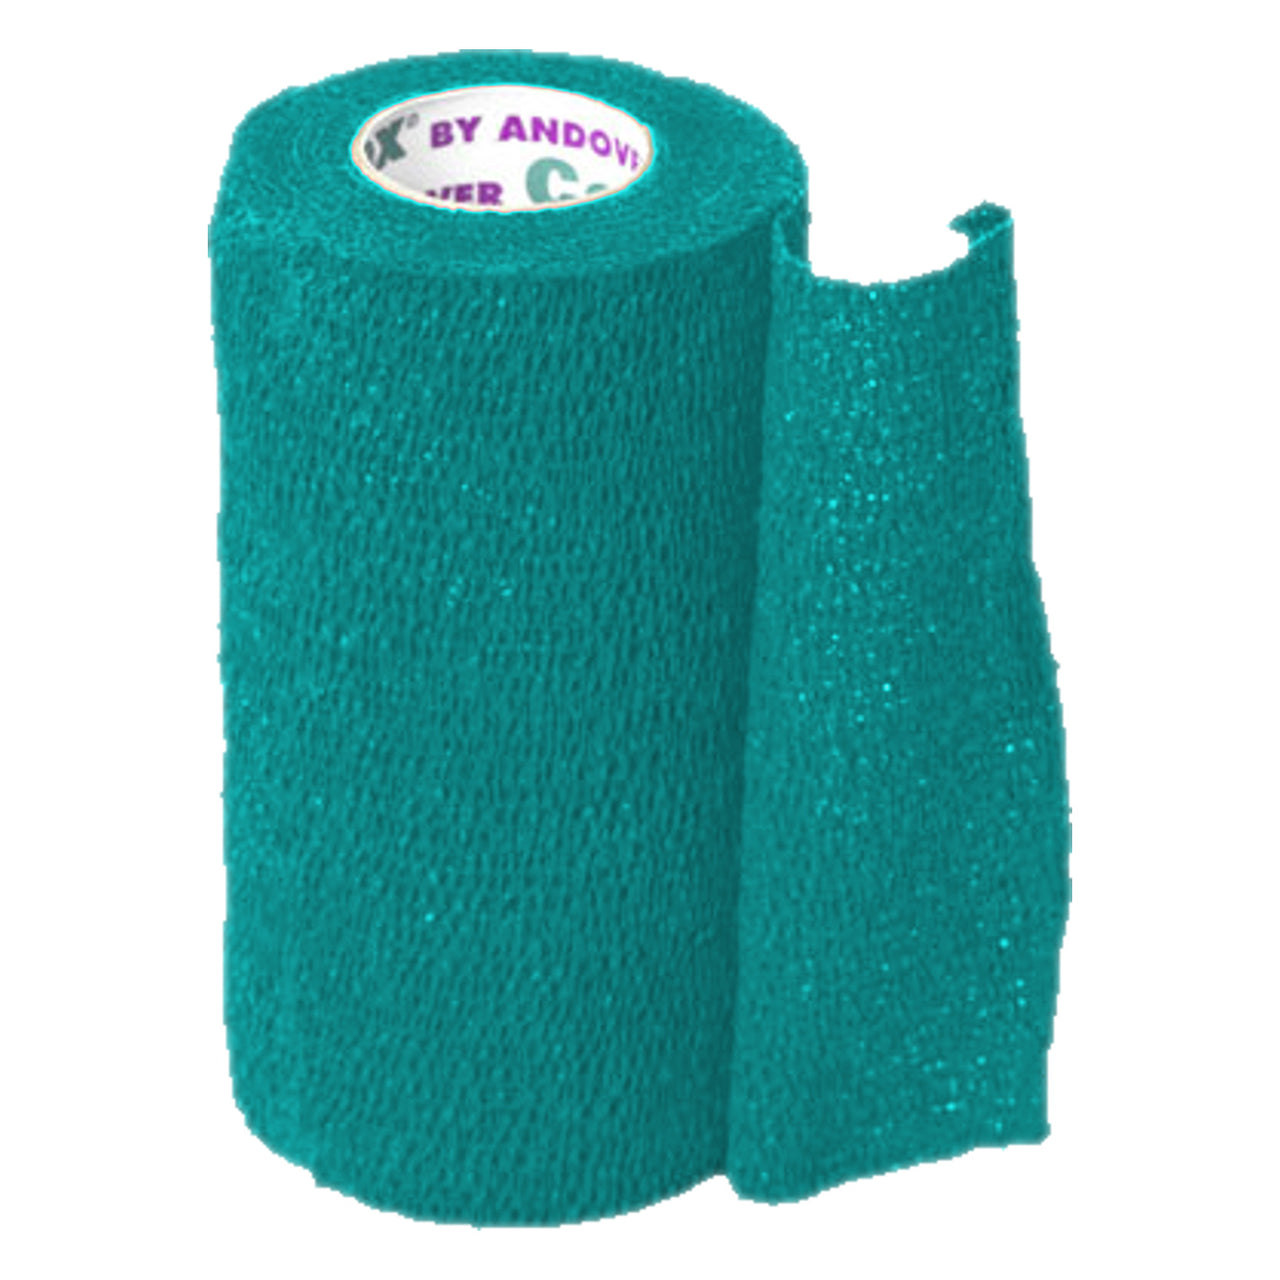 Andover Coflexvet 4X 15 Bandage (Teal) - Wound Dressing Andover - Canada